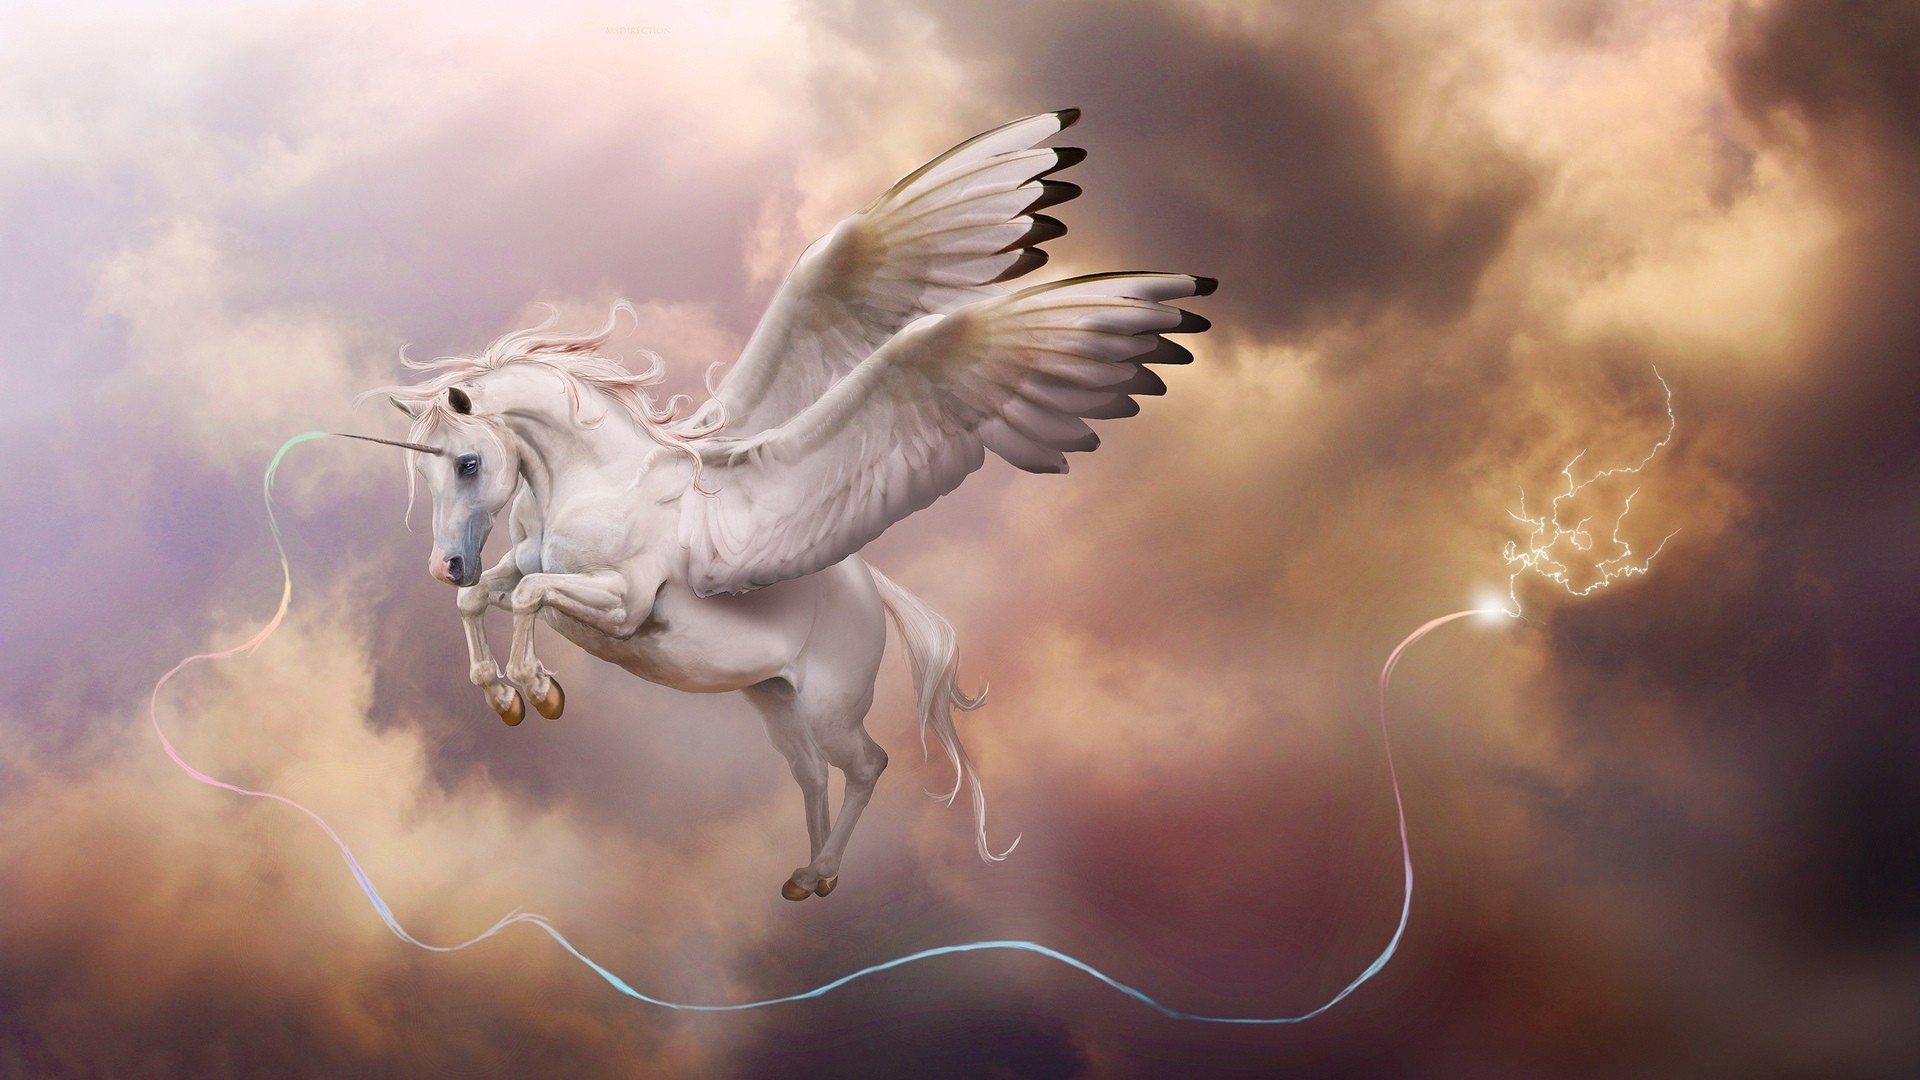 Unicorn Backgrounds   Wallpaper High Definition High Quality 1920x1080